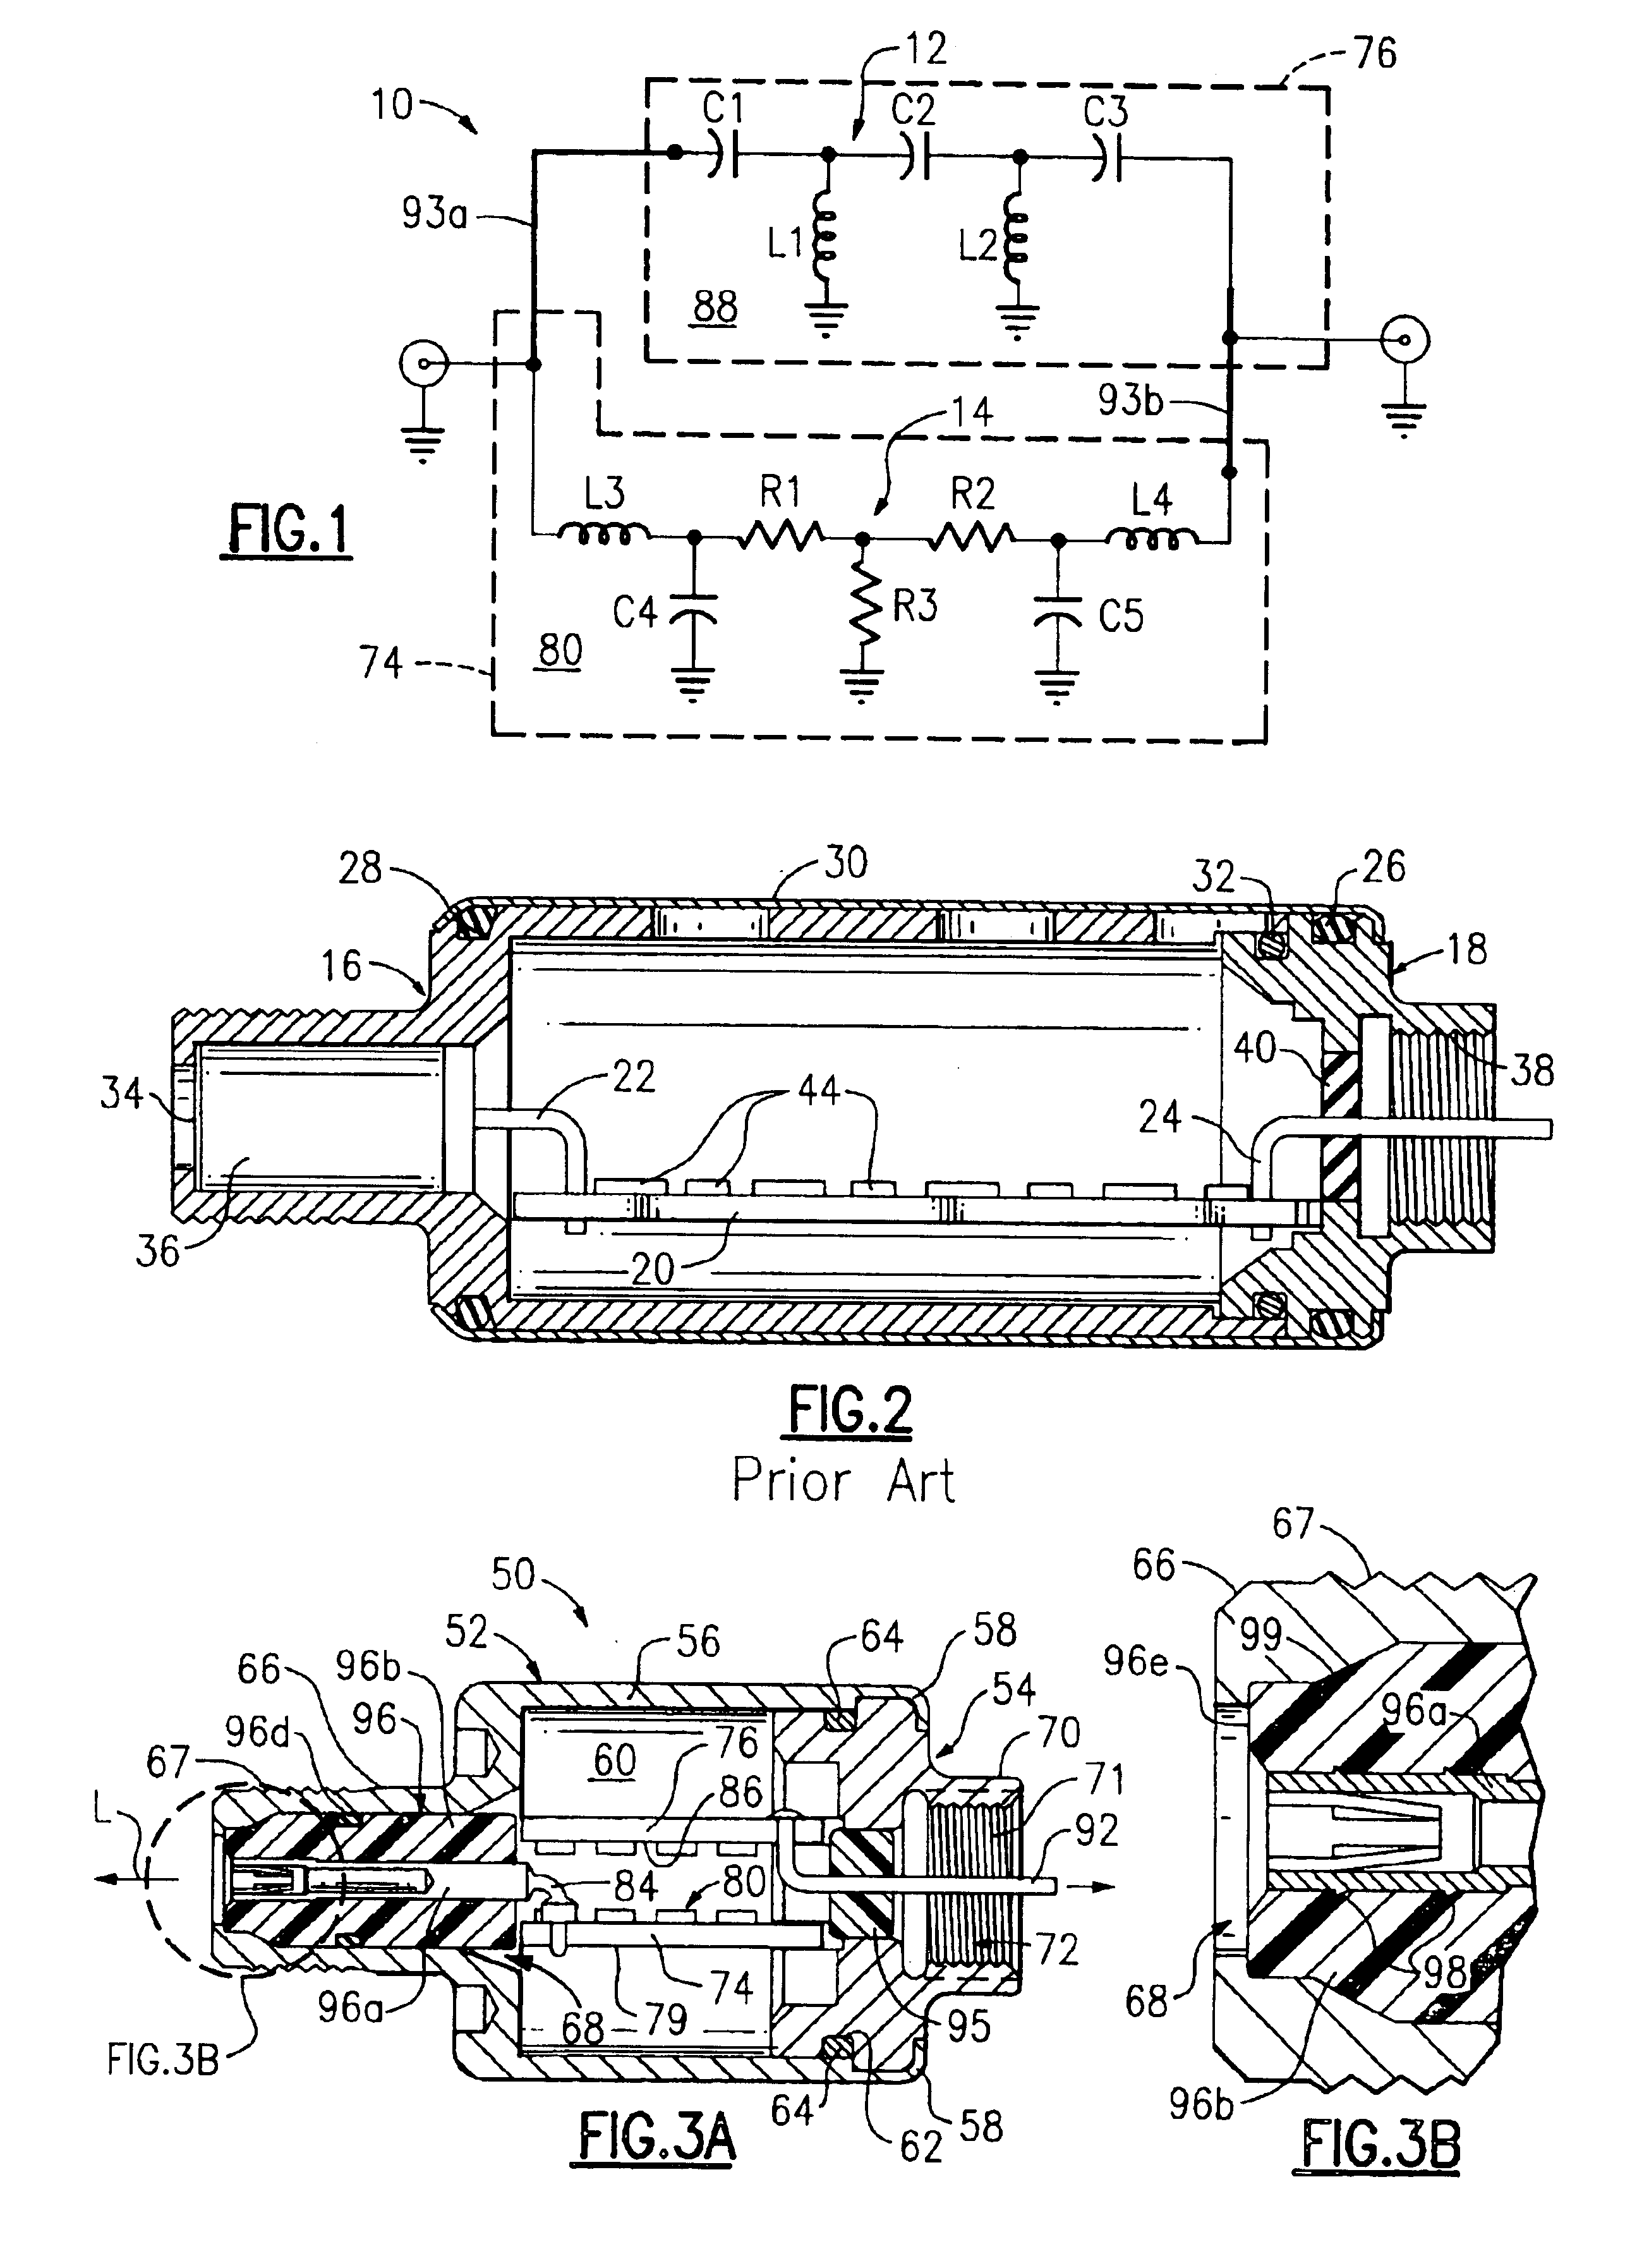 Electronic filter assembly